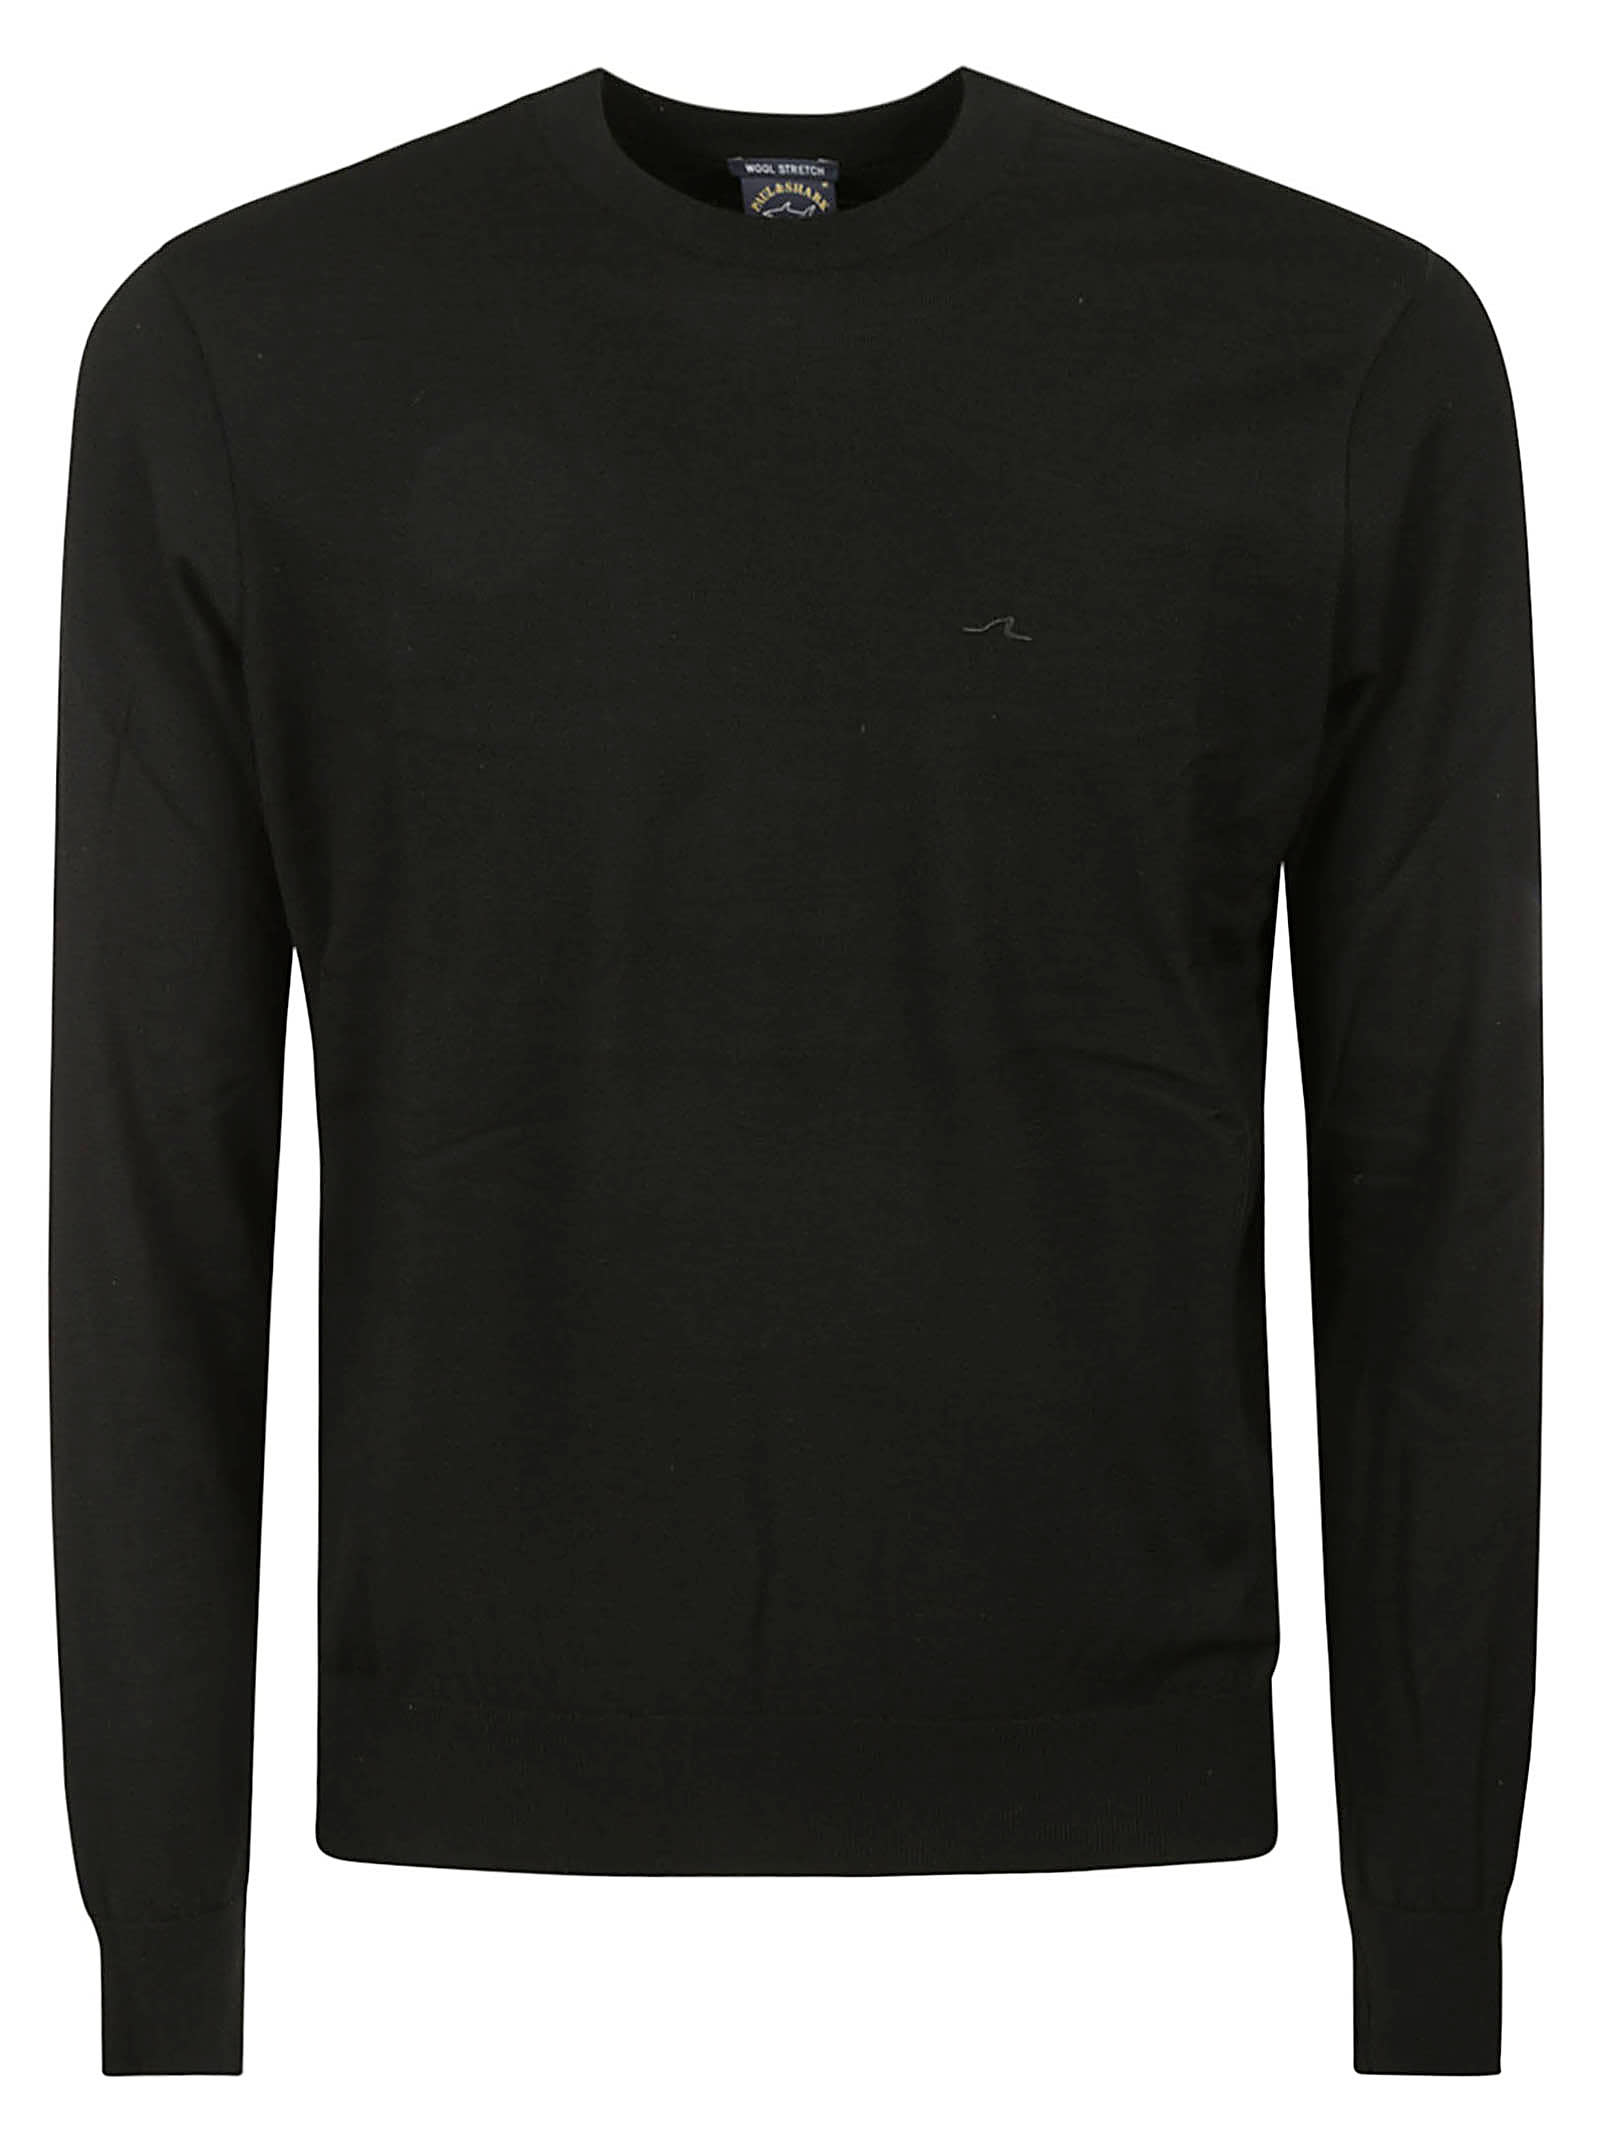 Paul&amp;shark Wool Stretch Crewneck With Embroidery In Black